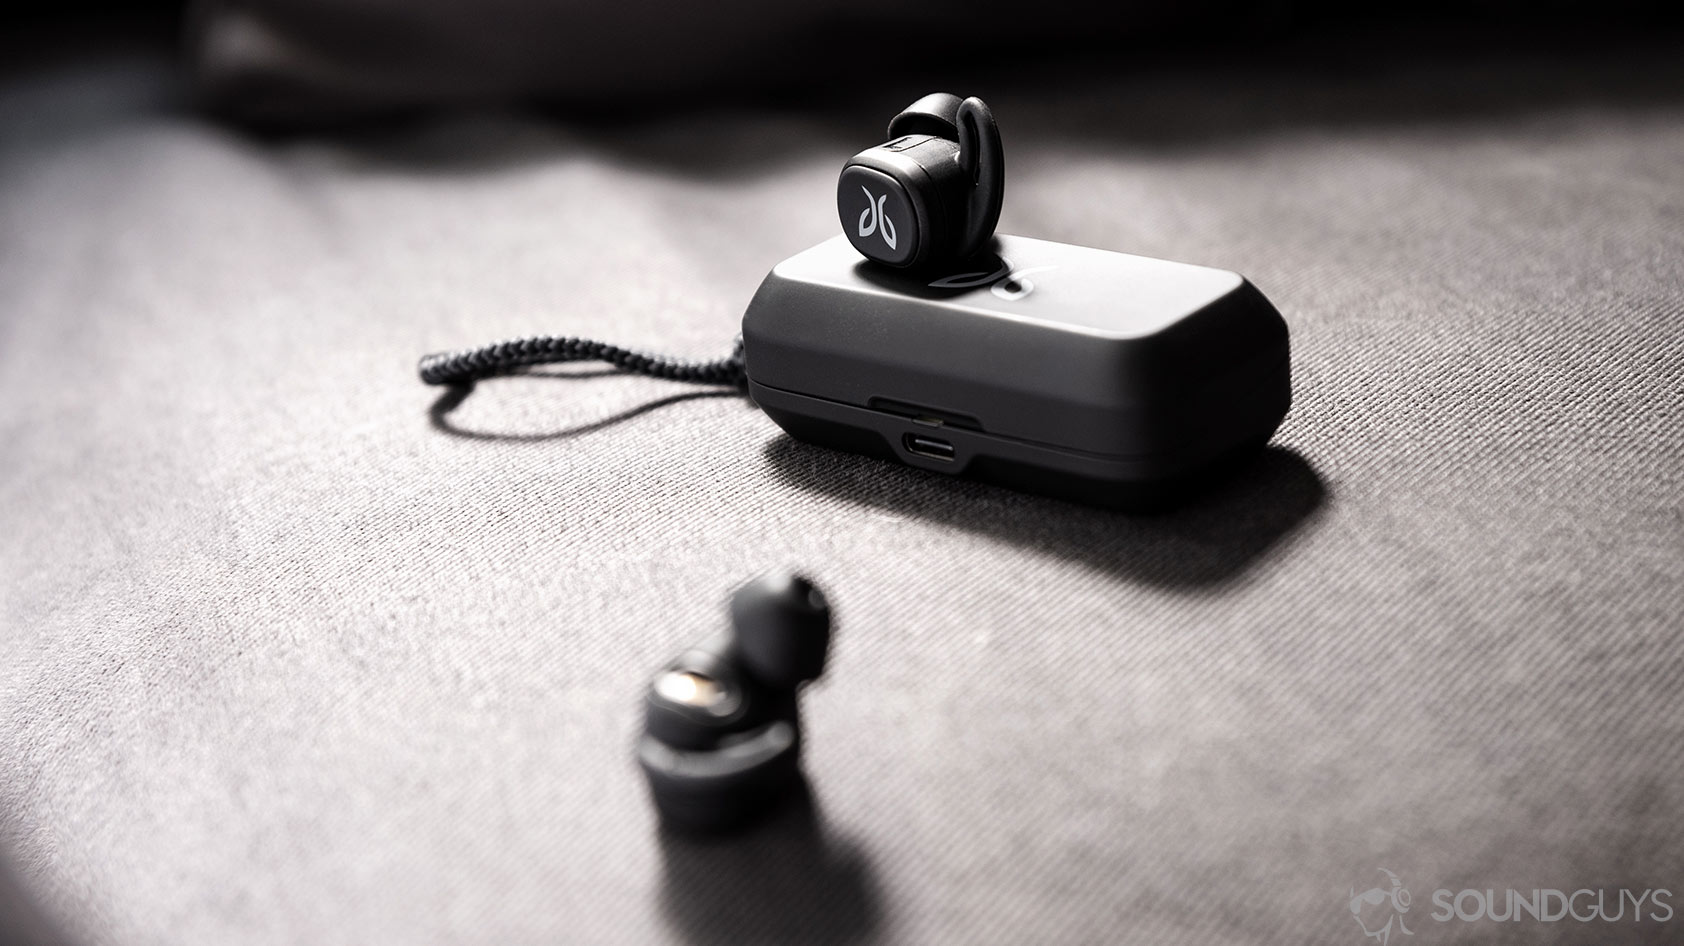 A photo of the Jaybird Vista earbuds outside of the case with one resting on top and the other in the foreground.